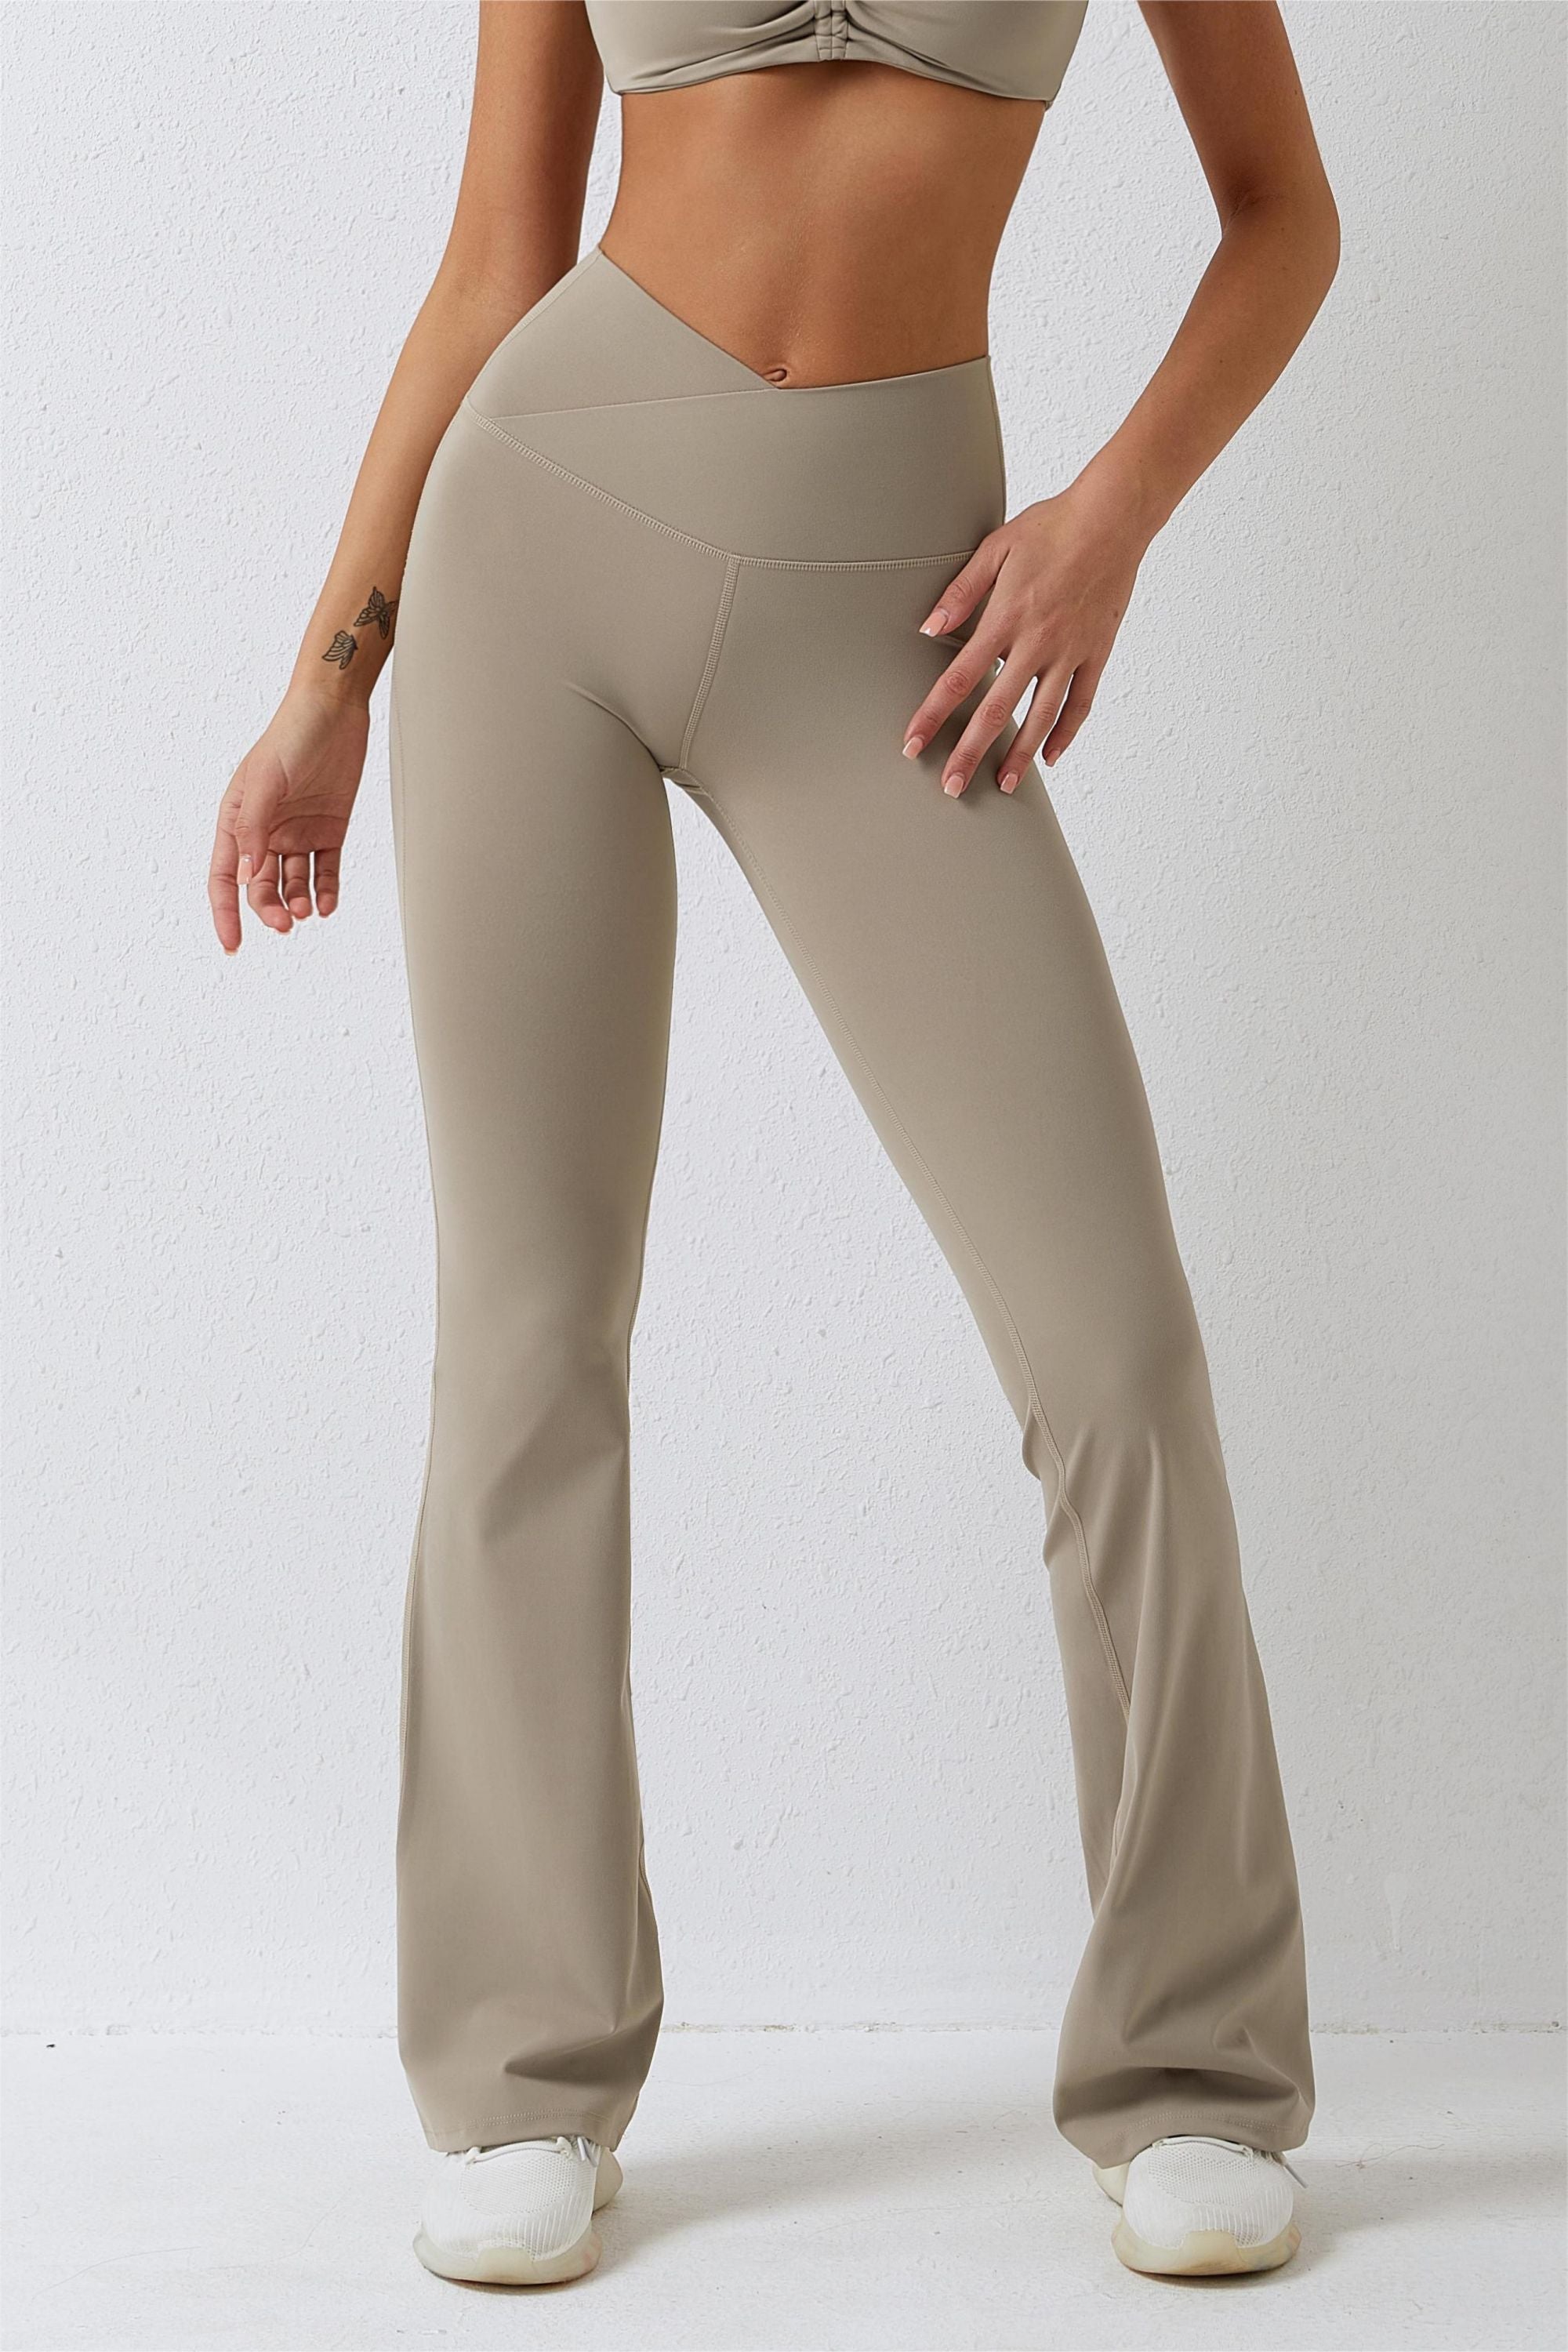 Eytino Womens Plus Size Flare Leggings High Waist Crossover Lounge Bell  Bottom Pants Trousers,1X Beige at  Women's Clothing store